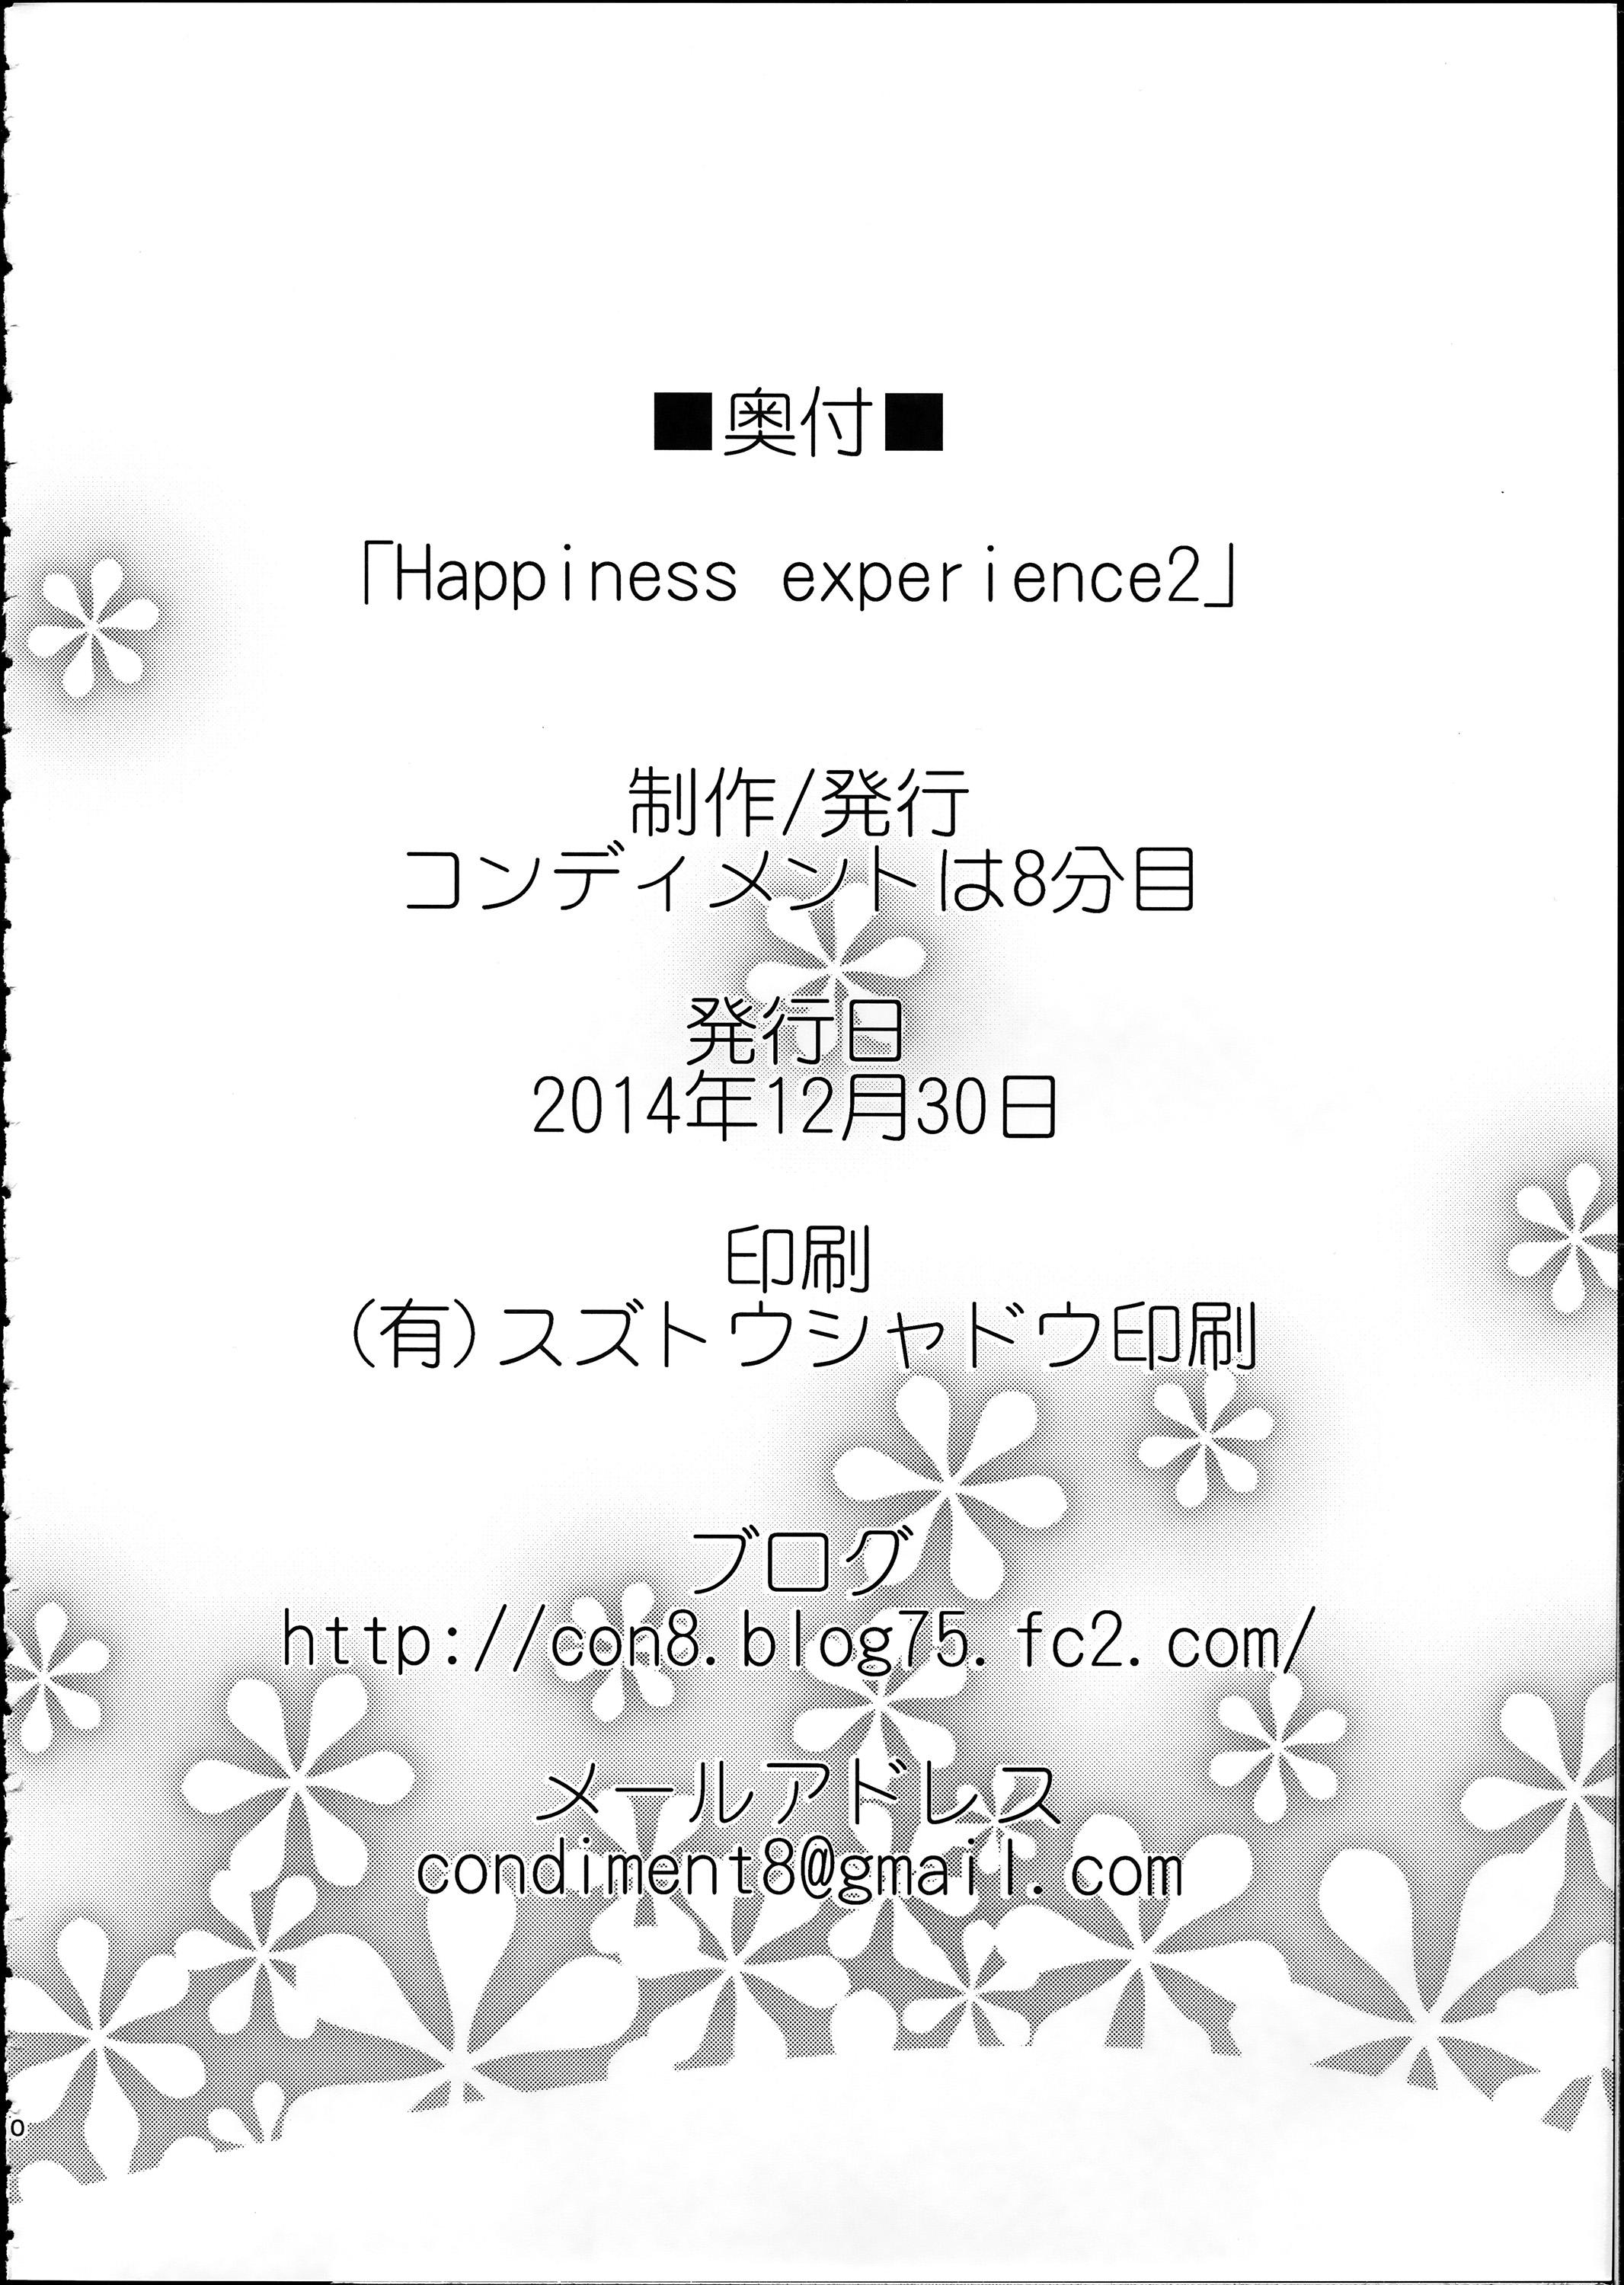 Happiness experience2 28